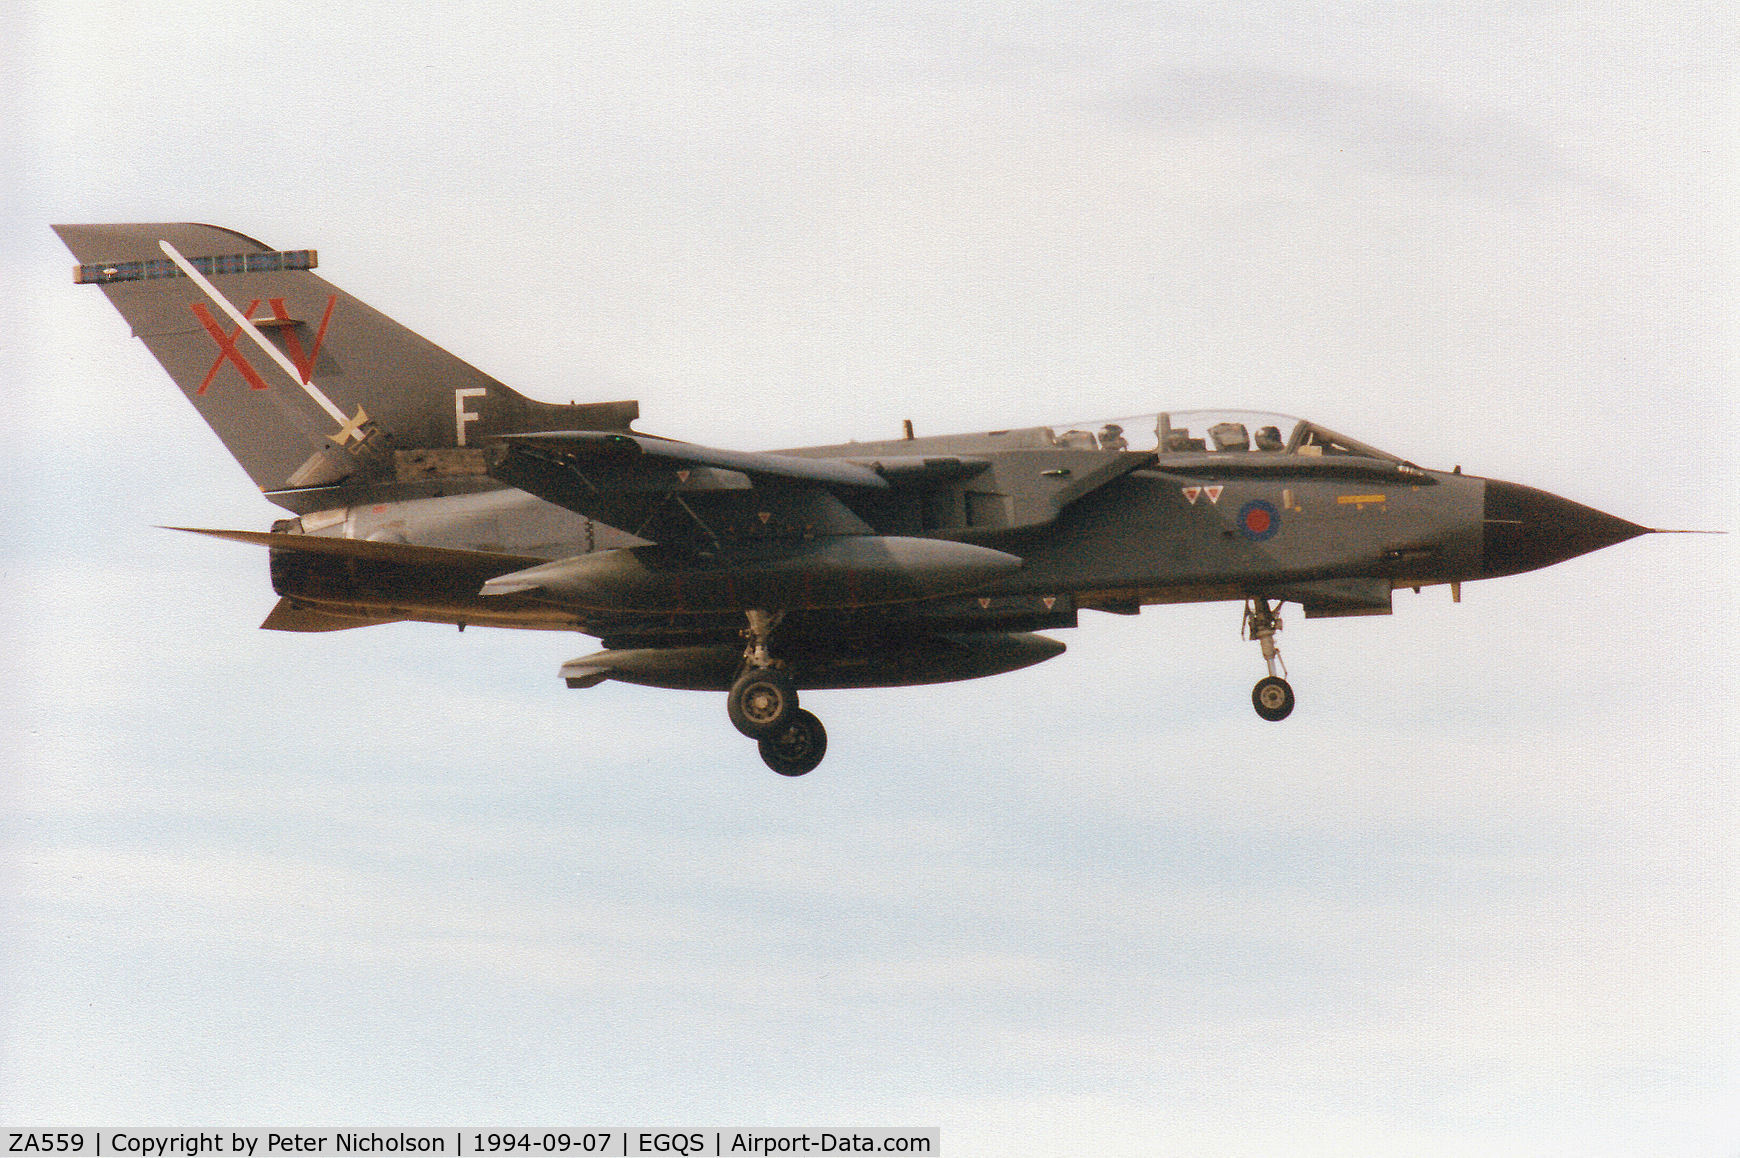 ZA559, 1981 Panavia 081/BS023/3043 C/N 081/BS023/3043, Tornado GR.1, callsign Mitre 3, of 15[Reserve] Squadron landing at RAF Lossiemouth in September 1994.